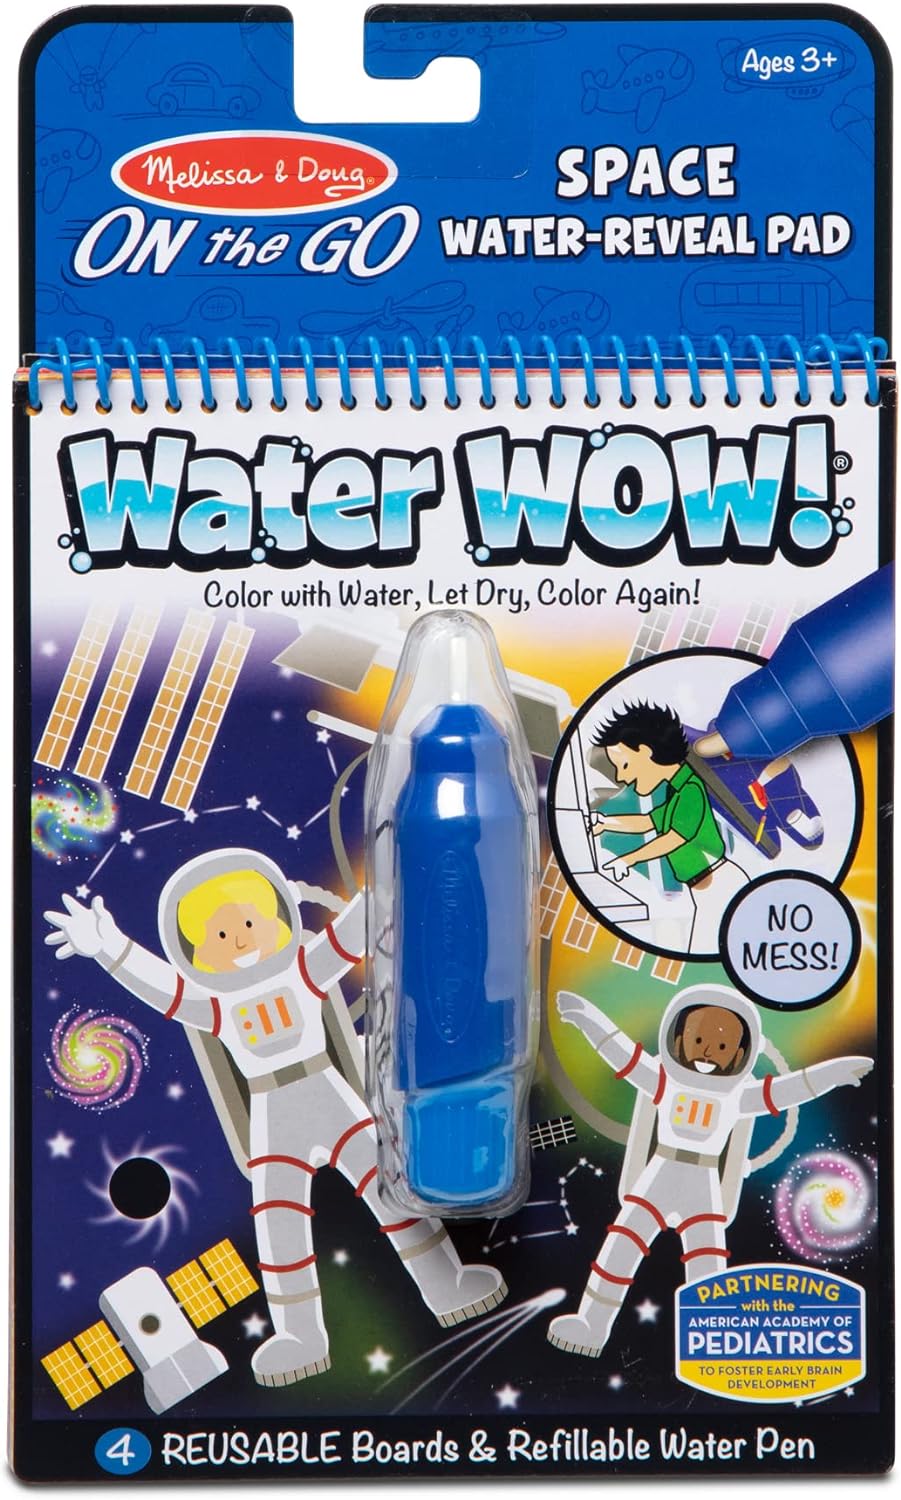 Melissa  Doug On the Go Water Wow! Reusable Water-Reveal Activity Pad - Vehicles - Stocking Stuffers, Mess Free Coloring Books For Toddlers Ages 3+, Travel Toys